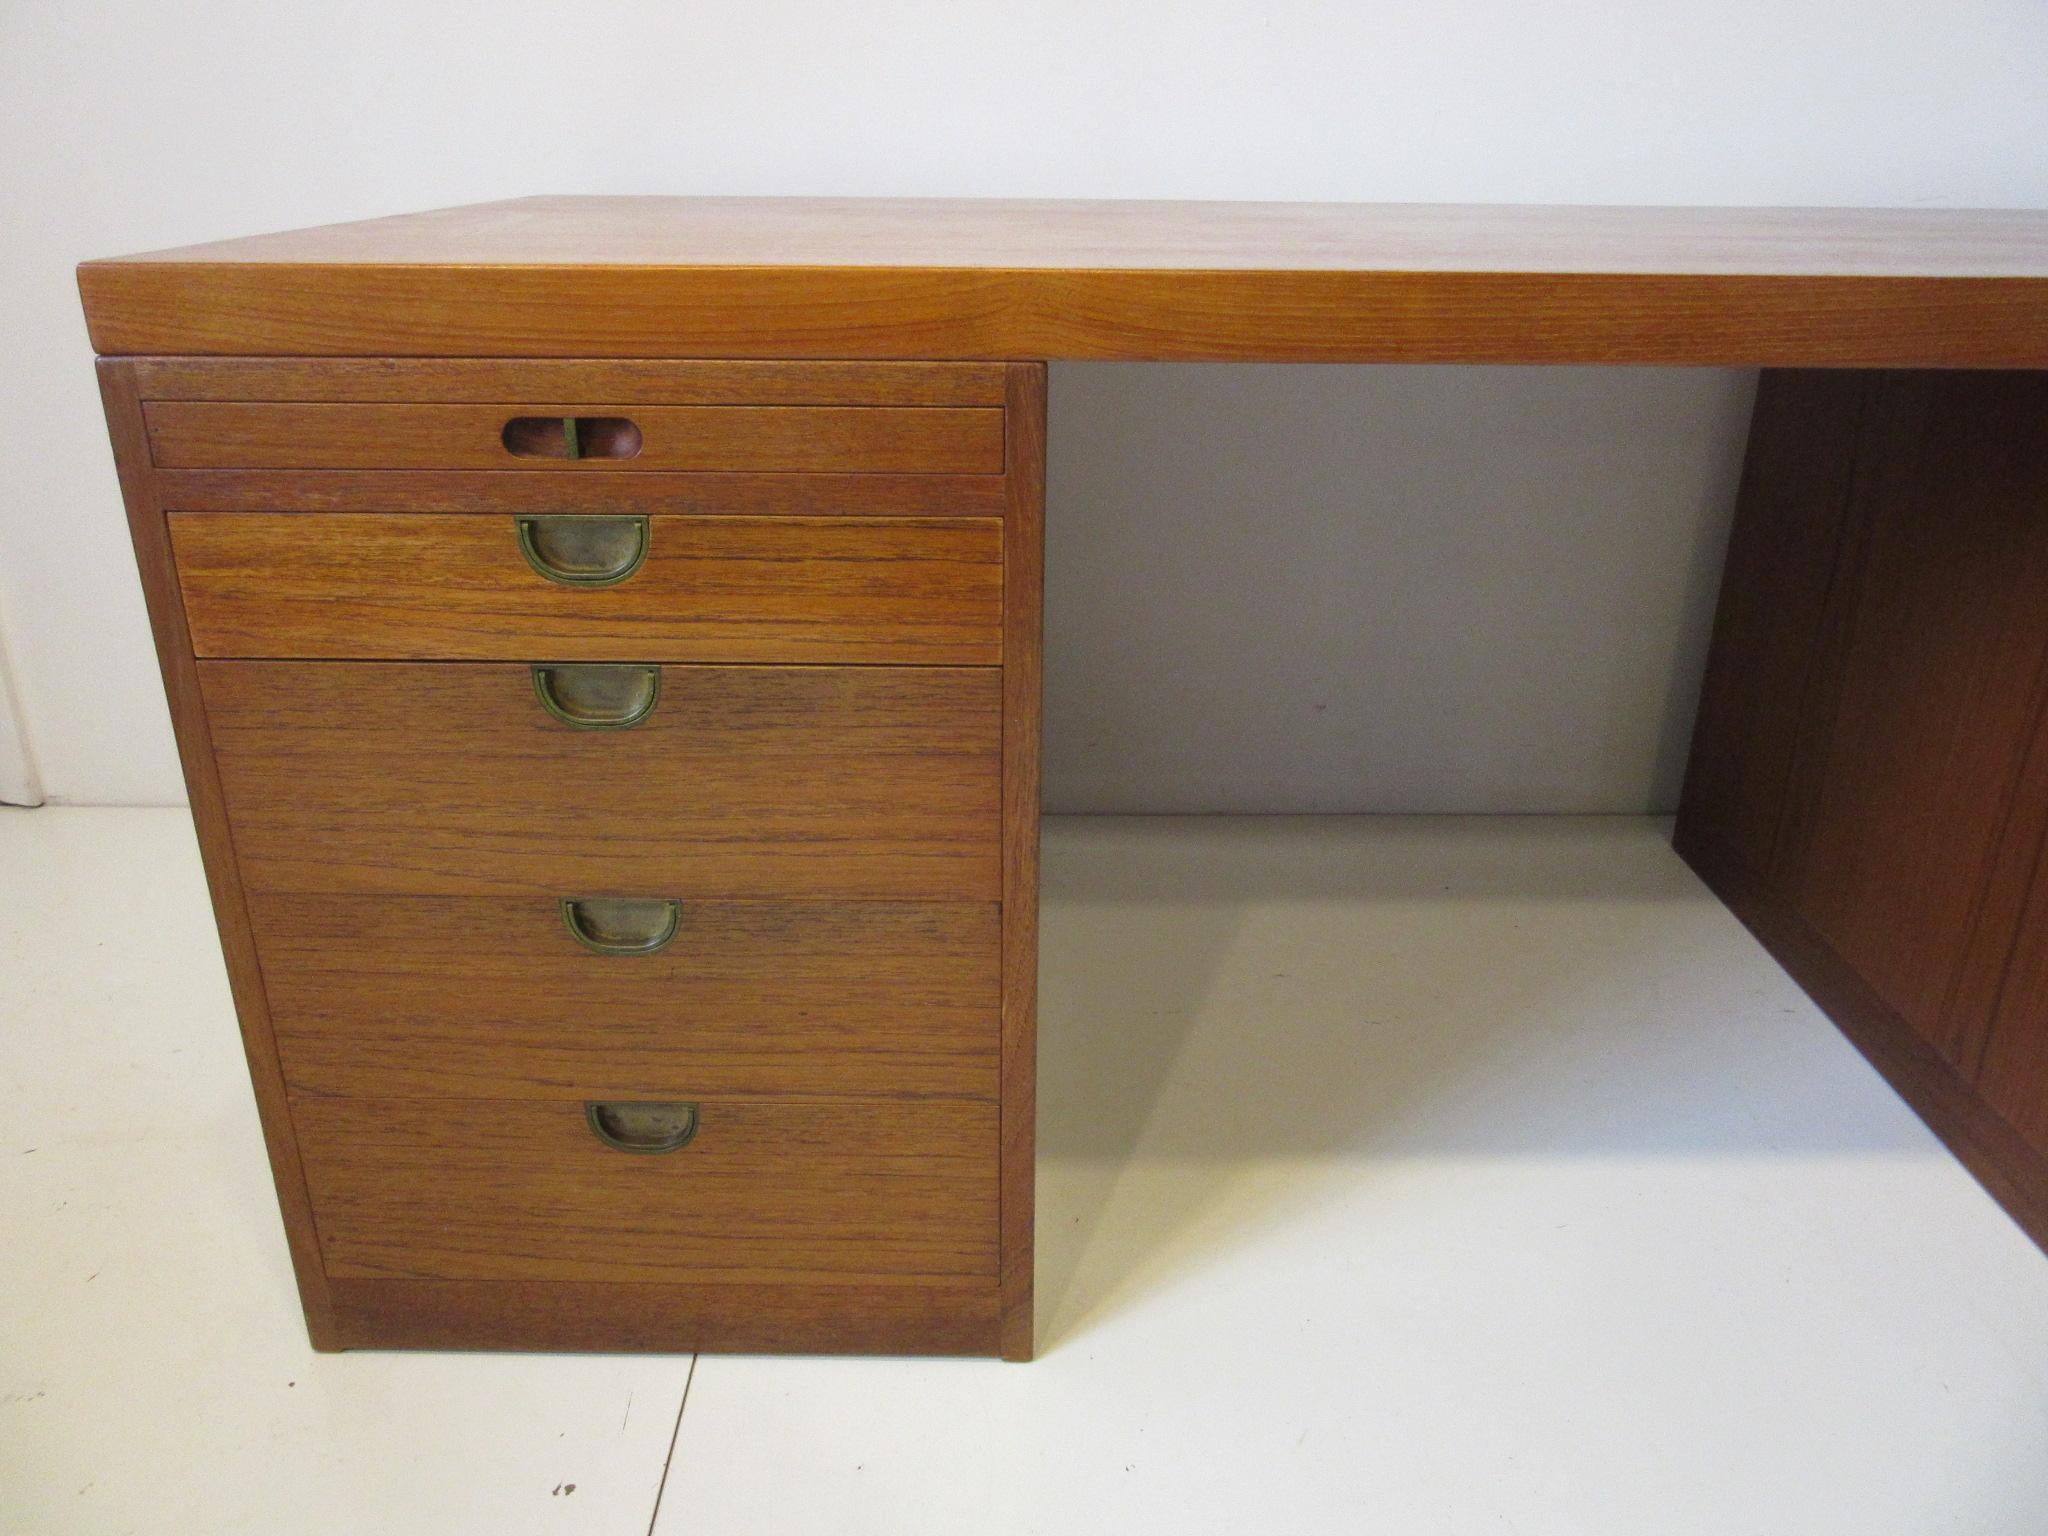 A very well crafted teak wood pedestal desk with pull out writing surfaces to each side, five drawers with one file sized drawer. Great brass inset pulls and the desk comes apart in three pieces the top and the two-drawer sections for easy moving